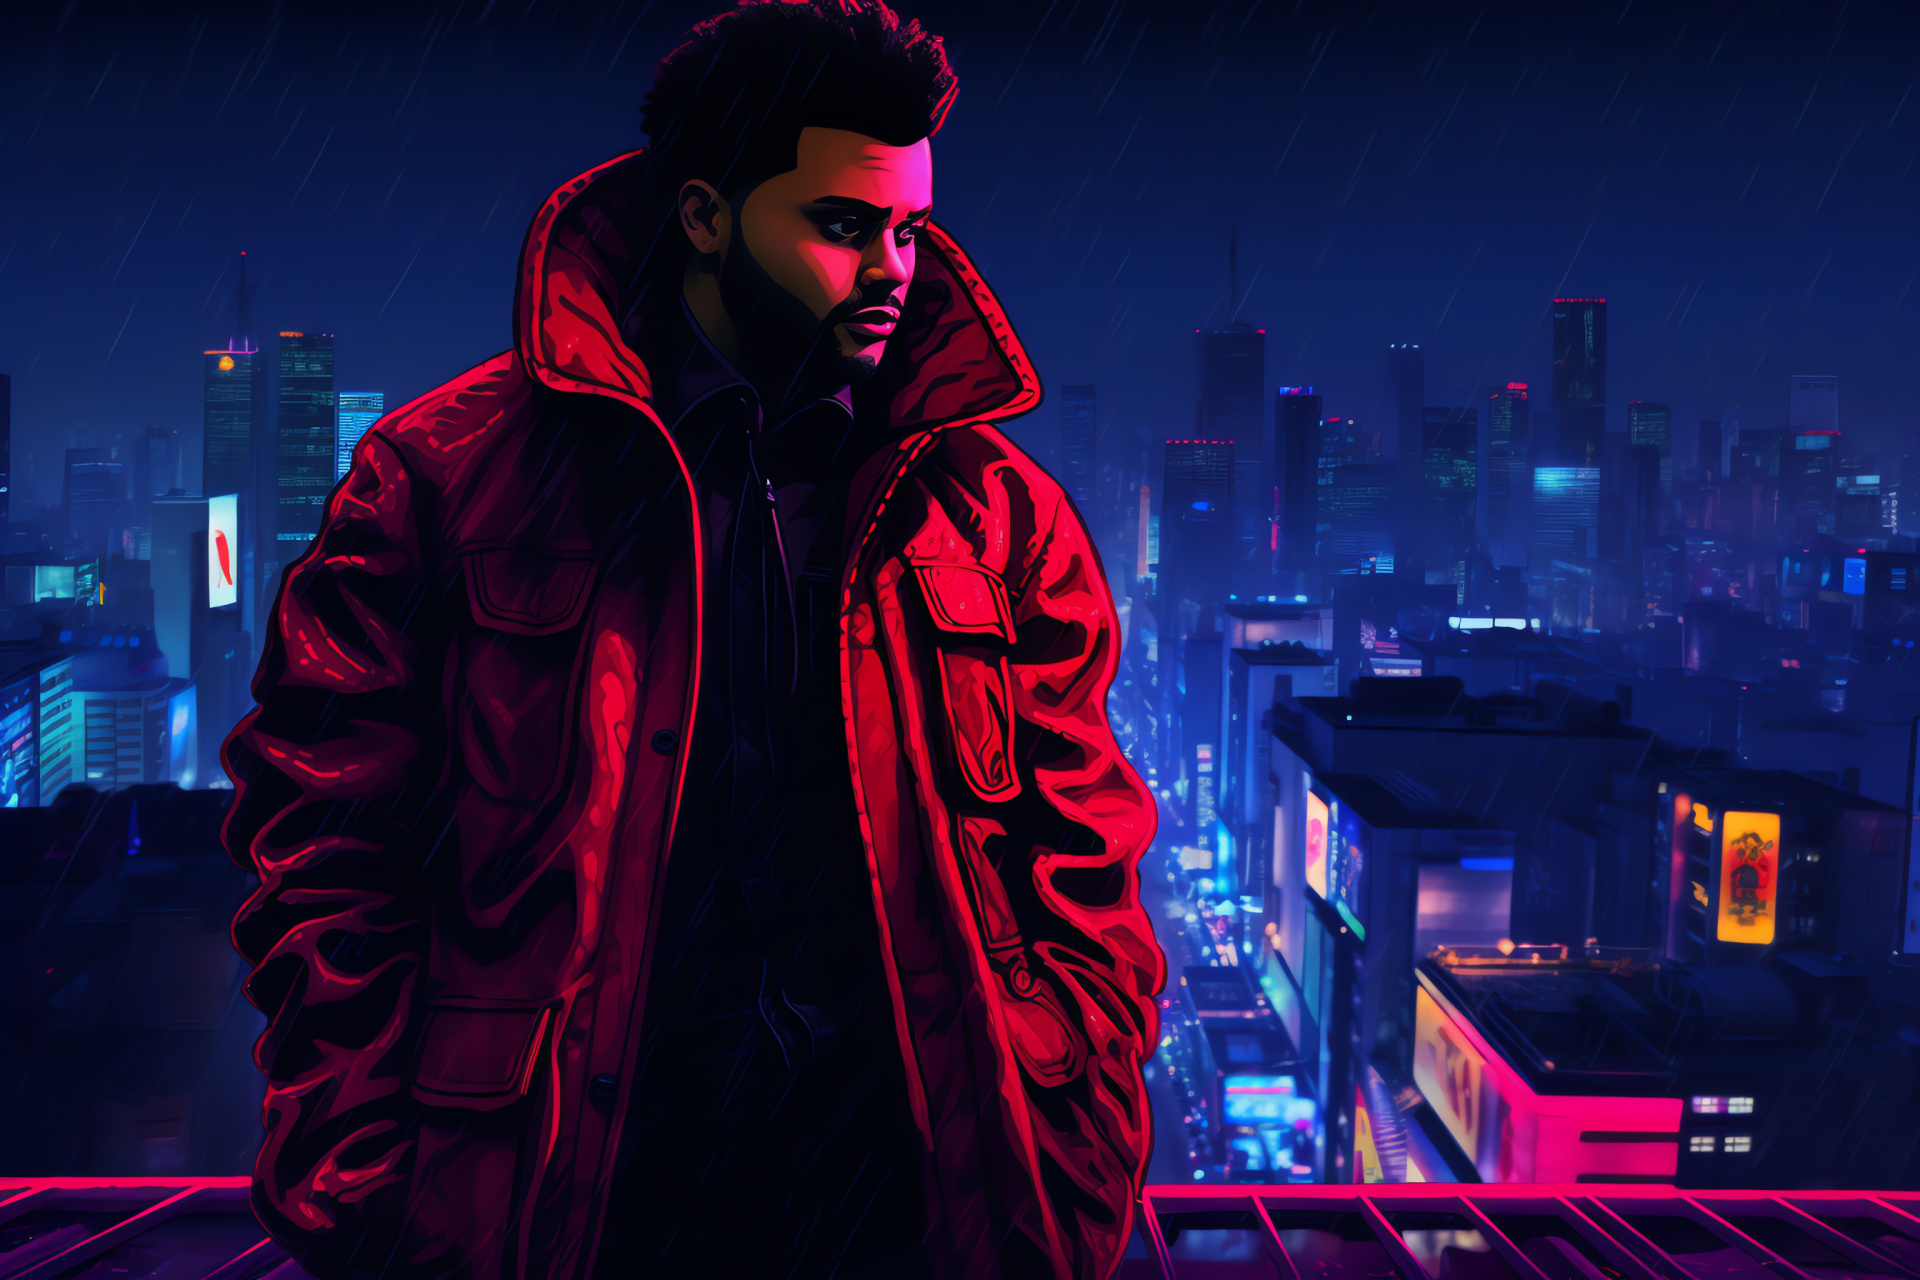 The Weeknd in cityscape setting, glowing neon-lit ambiance, urban rooftop scene, nocturnal city vibe, HD Desktop Image